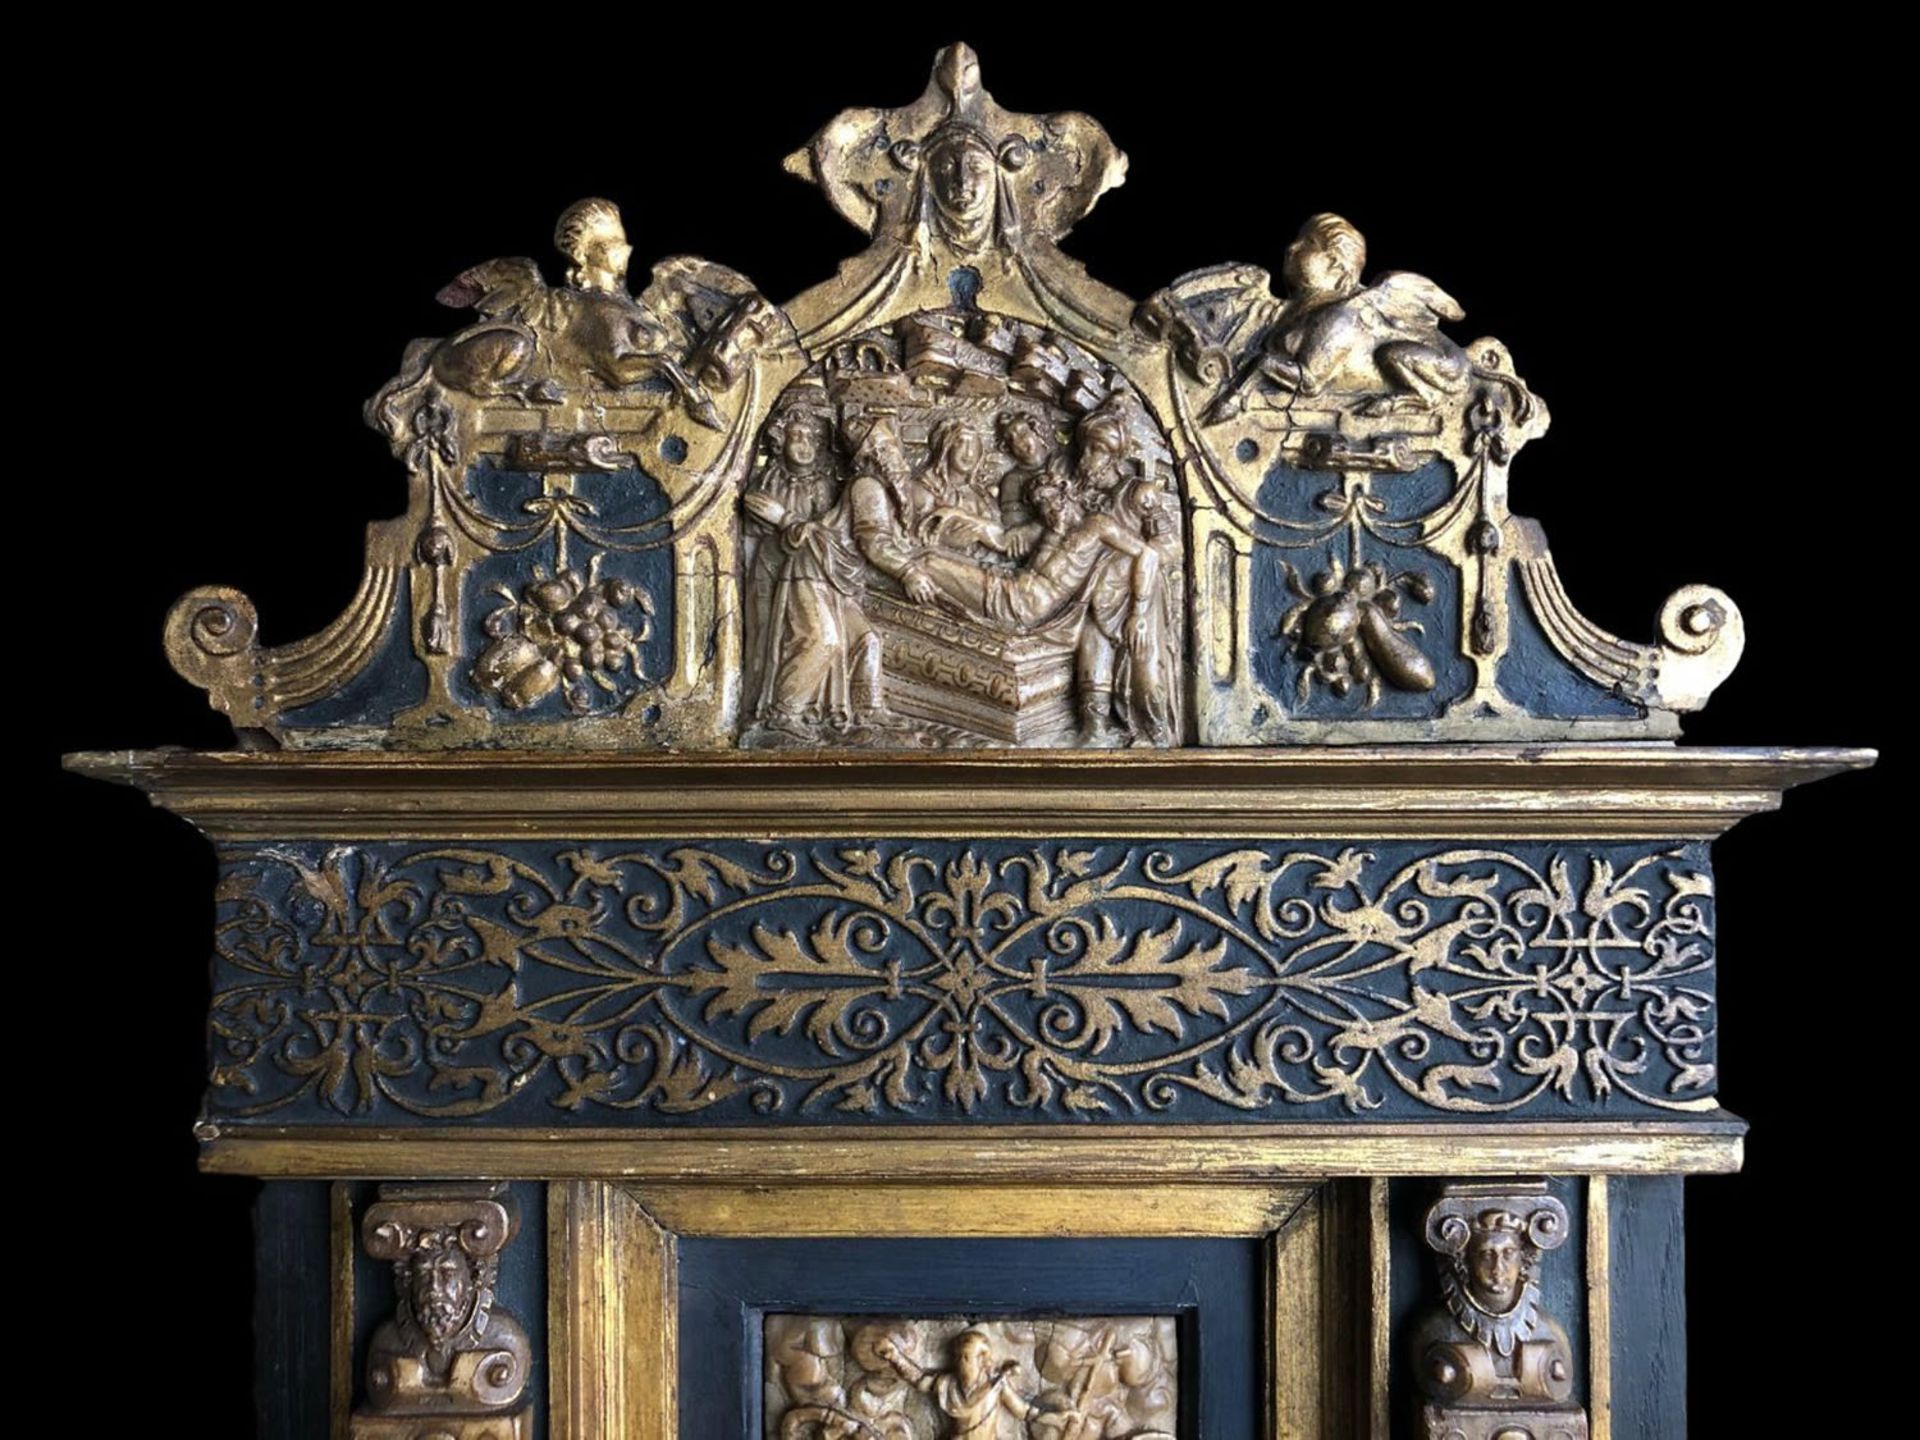 Important altar with two alabaster plaques from Mechelen, 16th century - Image 5 of 9